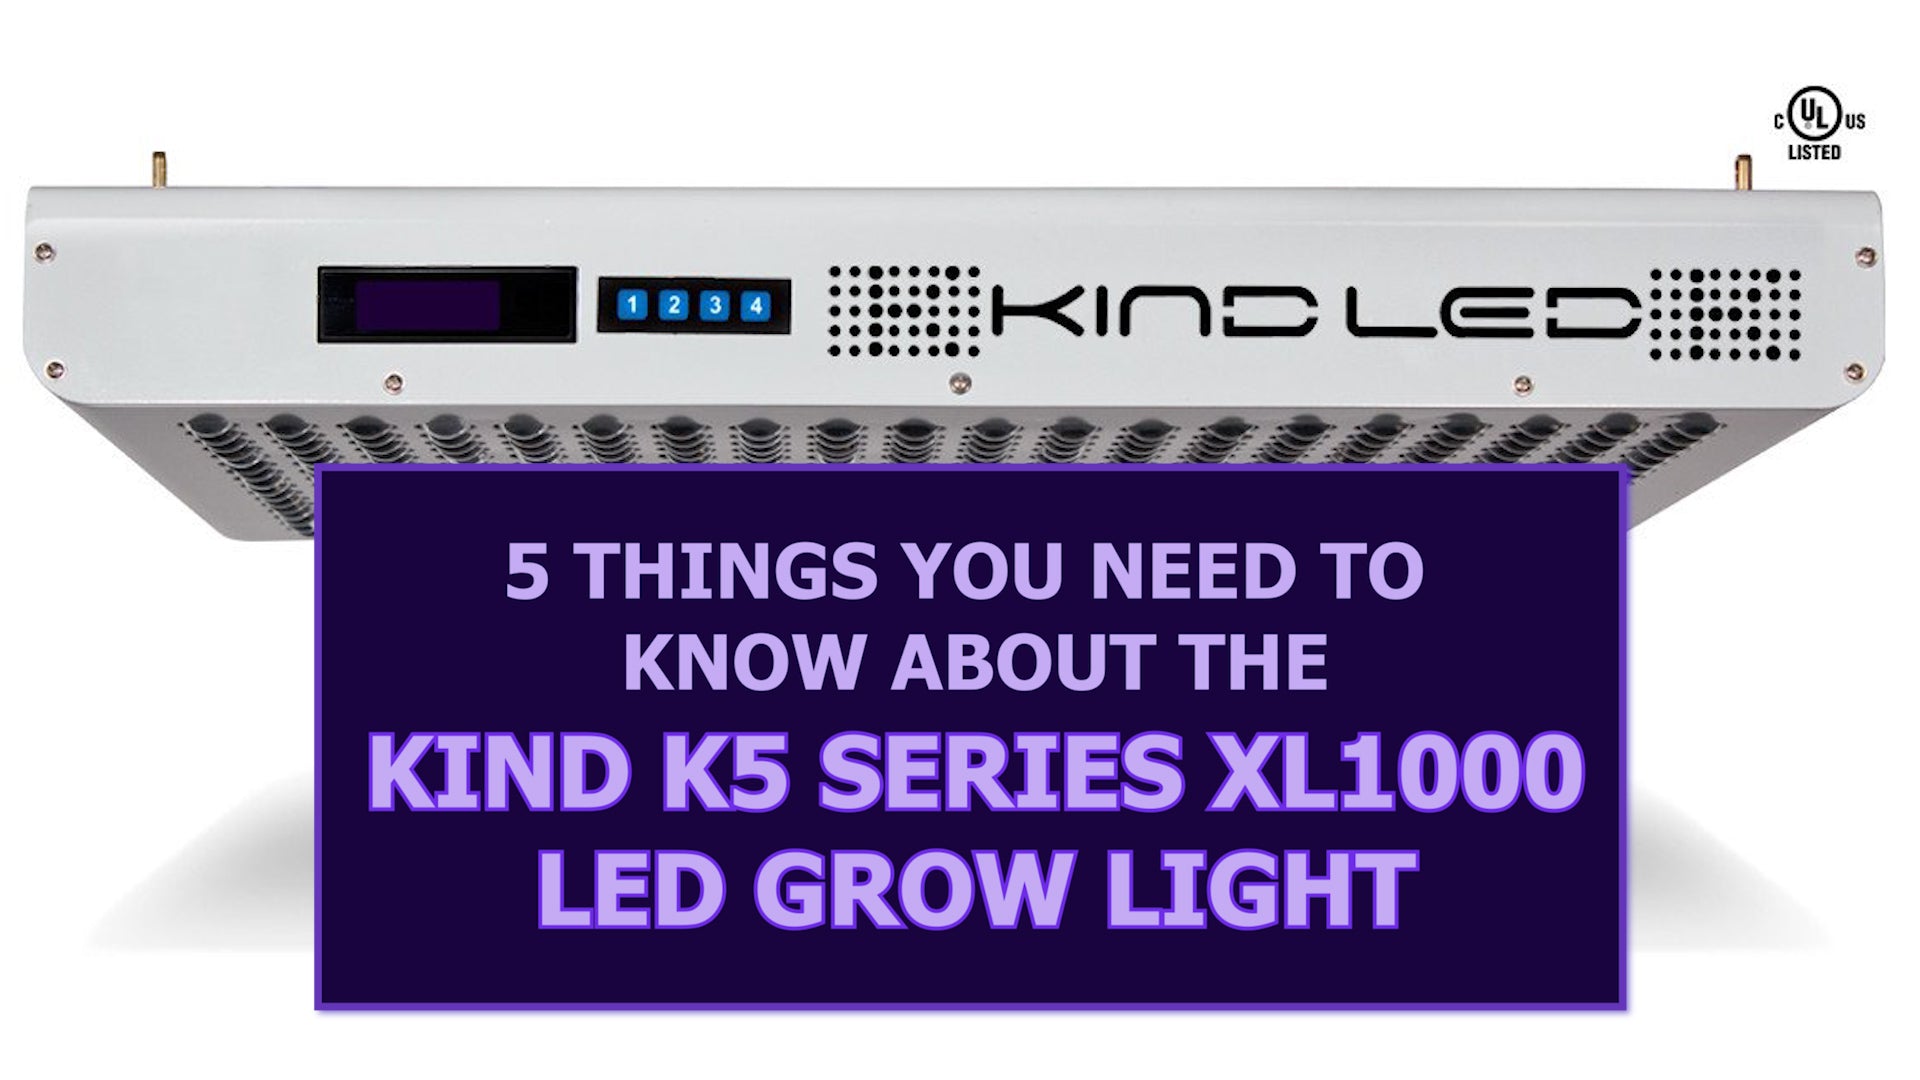 5 Things You Need to Know about the Kind K5 series XL1000 LED Grow Light